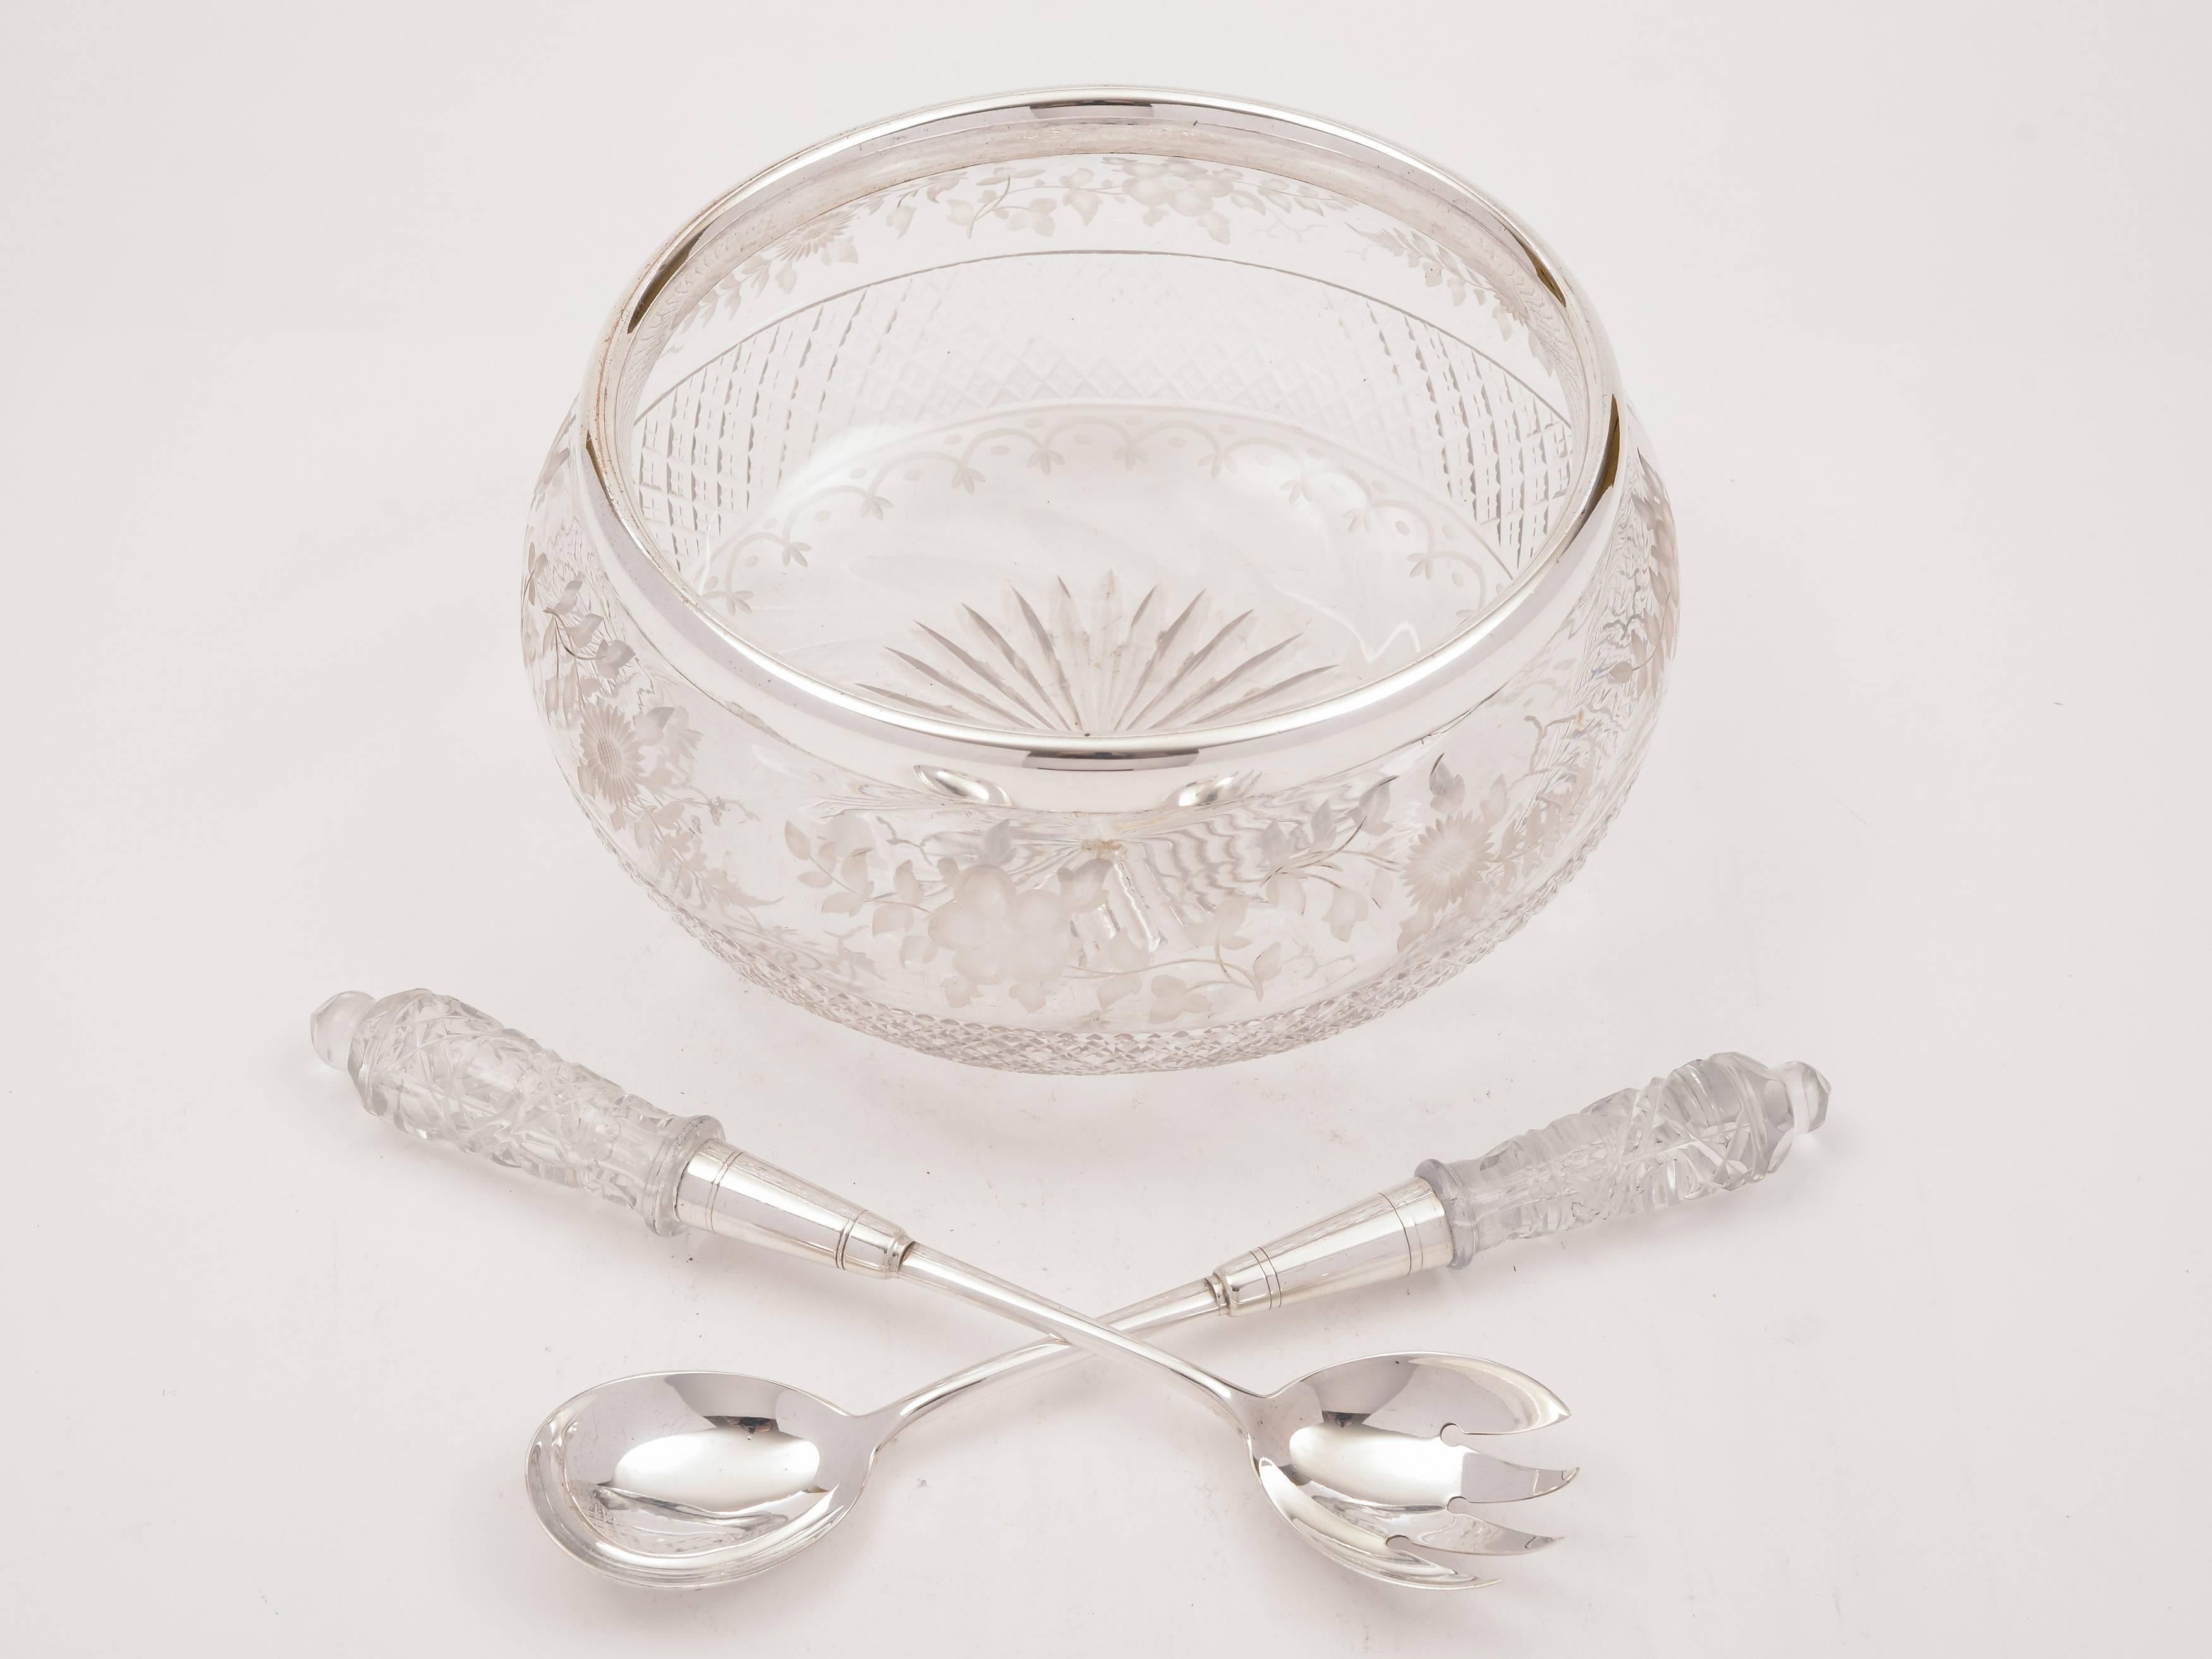 A beautiful English Edwardian glass salad bowl with gorgeous etched flower and cut decoration, star cut base and silver plated rim. Comes with a pair of glass handled salad servers, circa 1905. 

Total weight: 1710g.
   